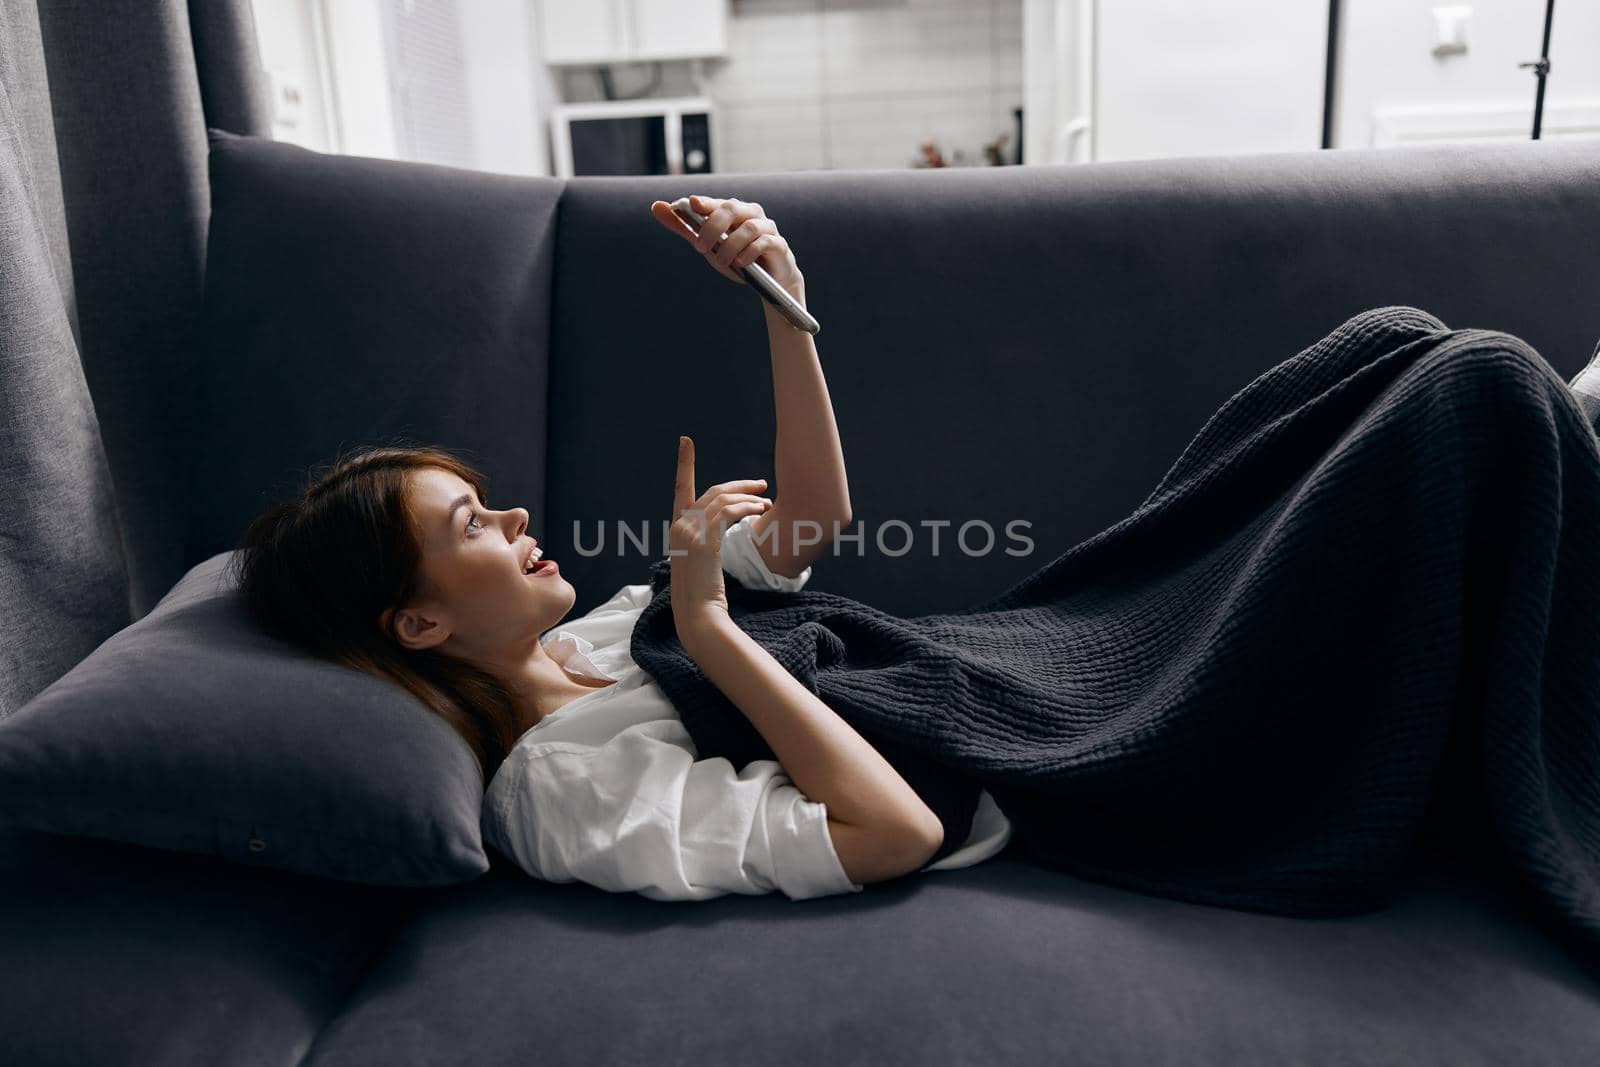 woman looking at the phone screen hiding with a blanket on the sofa. High quality photo